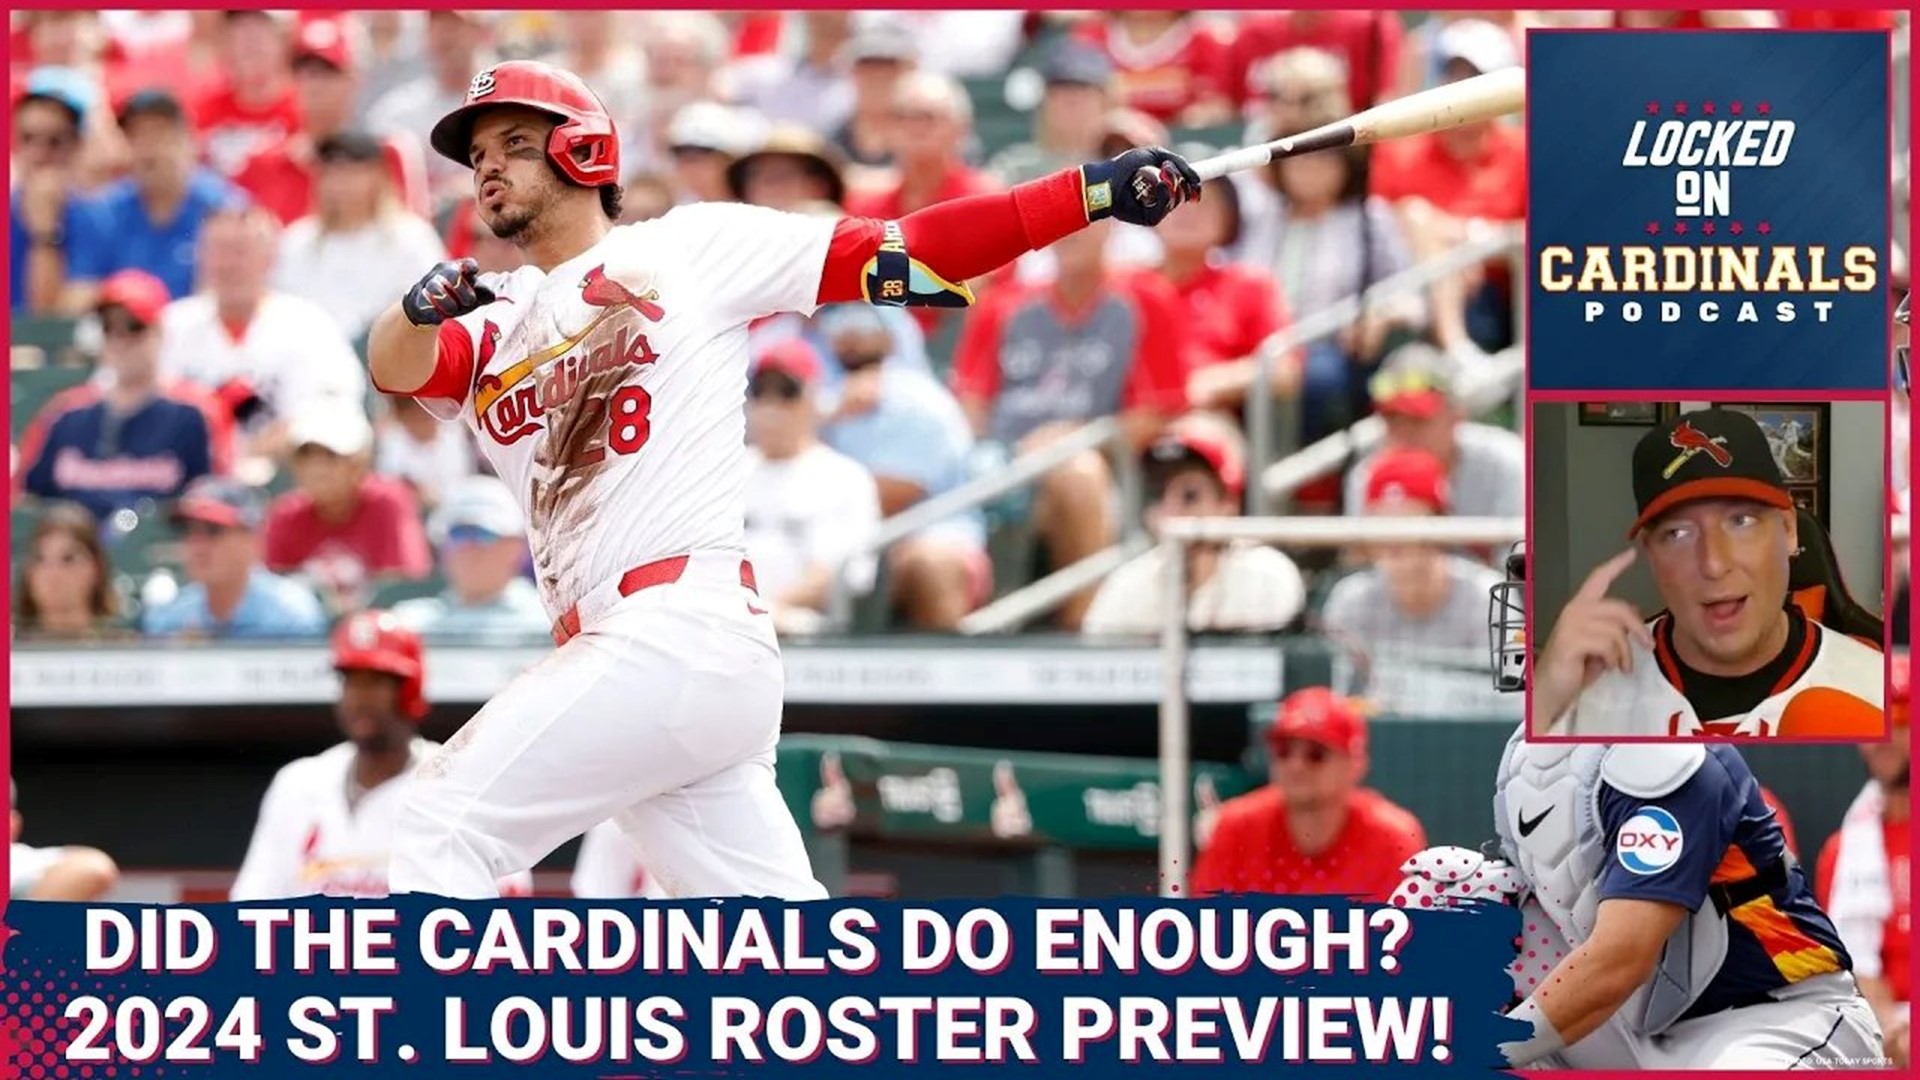 4 St. Louis Cardinals make history on Opening Day